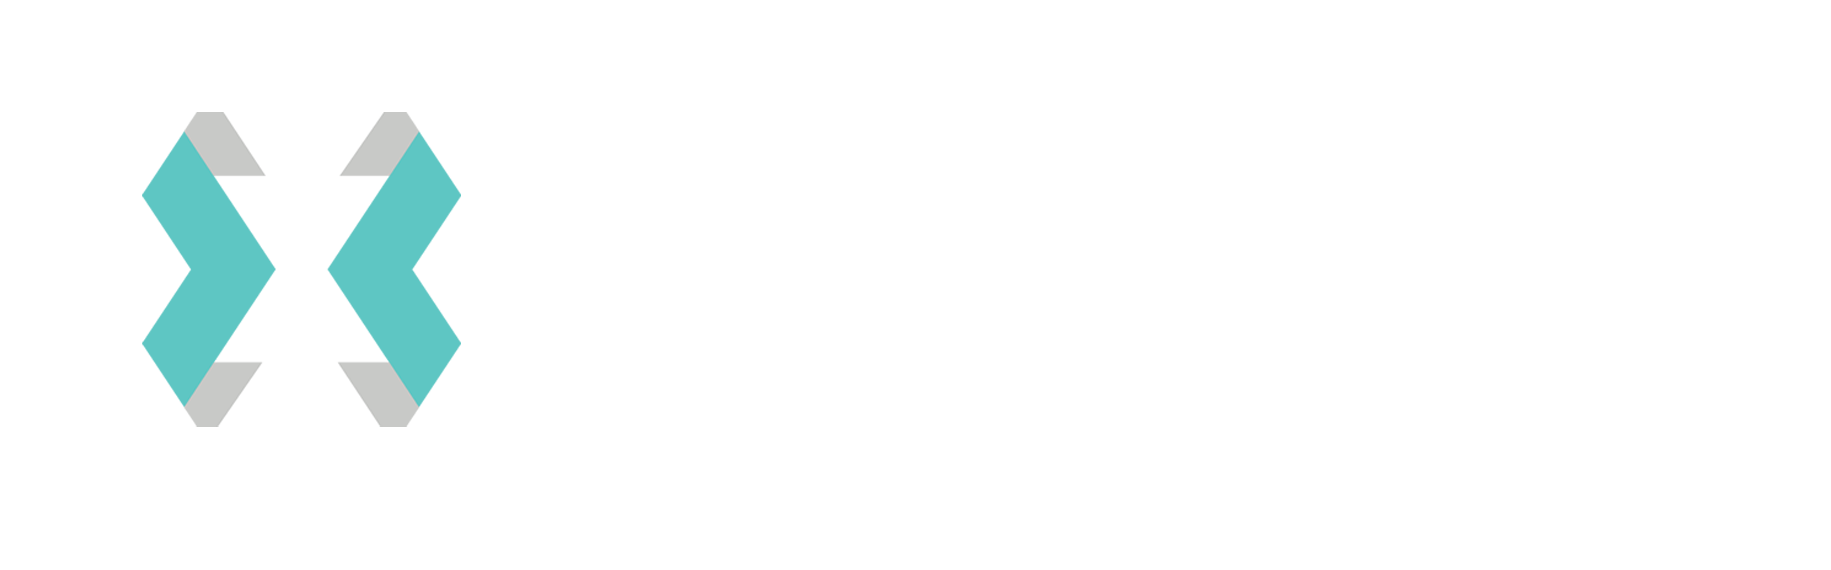 ORCODA RENTAL CONNECT